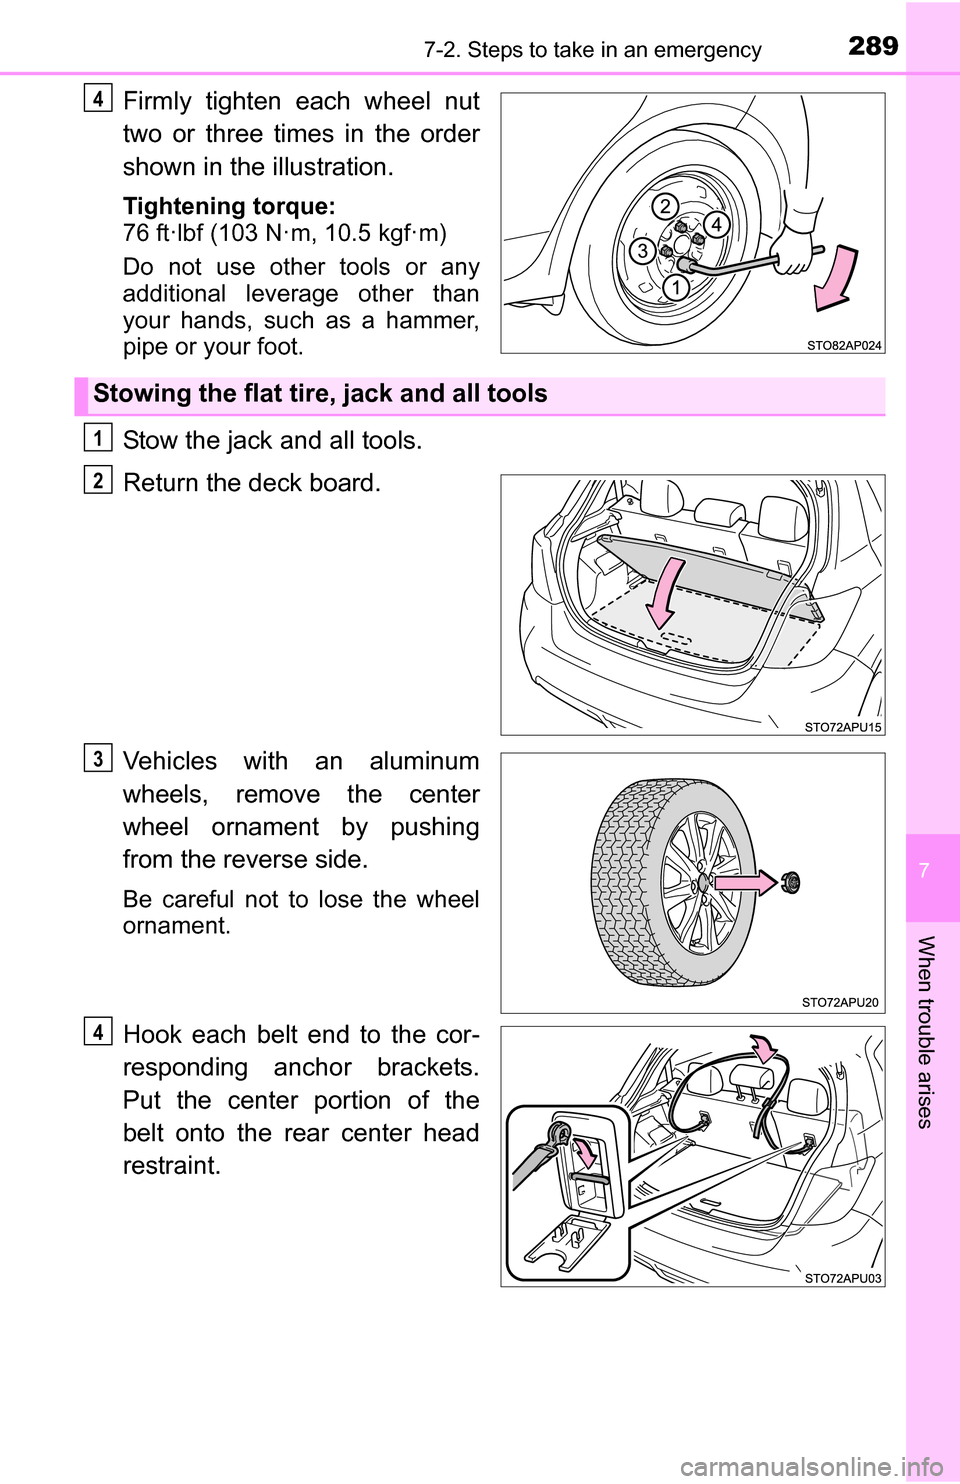 TOYOTA YARIS 2016 3.G Owners Manual 2897-2. Steps to take in an emergency
7
When trouble arises
Firmly tighten each wheel nut
two or three times in the order
shown in the illustration.
Tightening torque:
76 ft·lbf (103 N·m, 10.5 kgf·